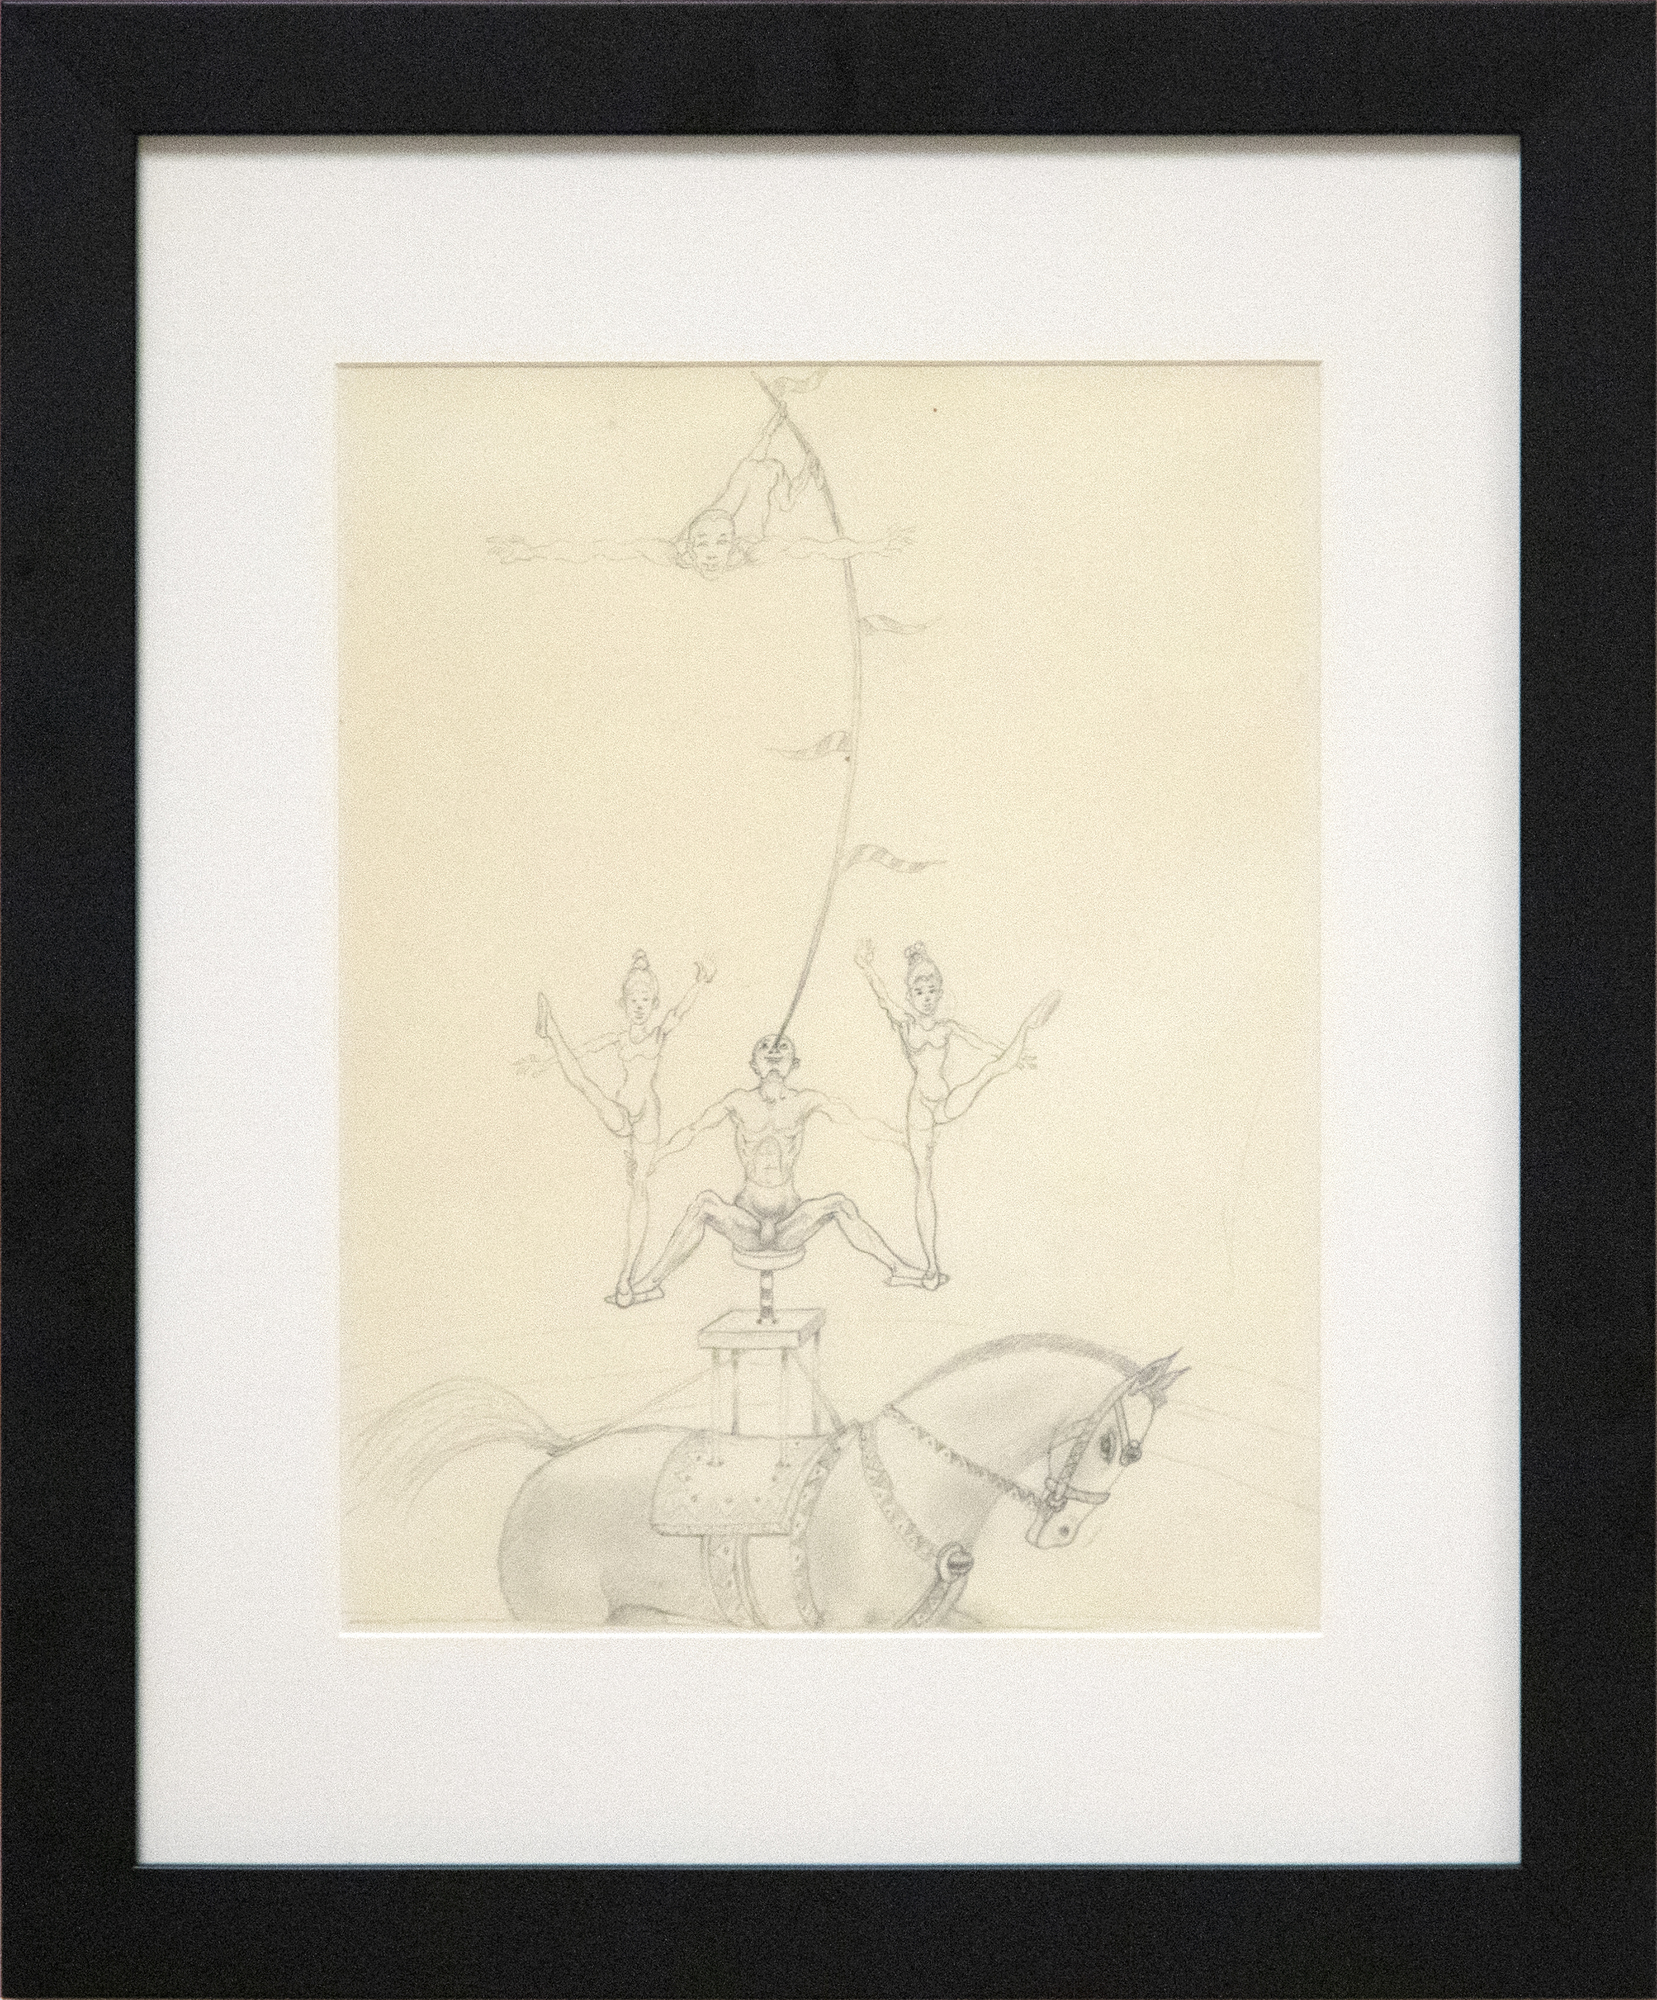 IRVING NORMAN - The Circus, The Balancing Act 2a (a Study) - pencil on paper - 11 x 9 in.